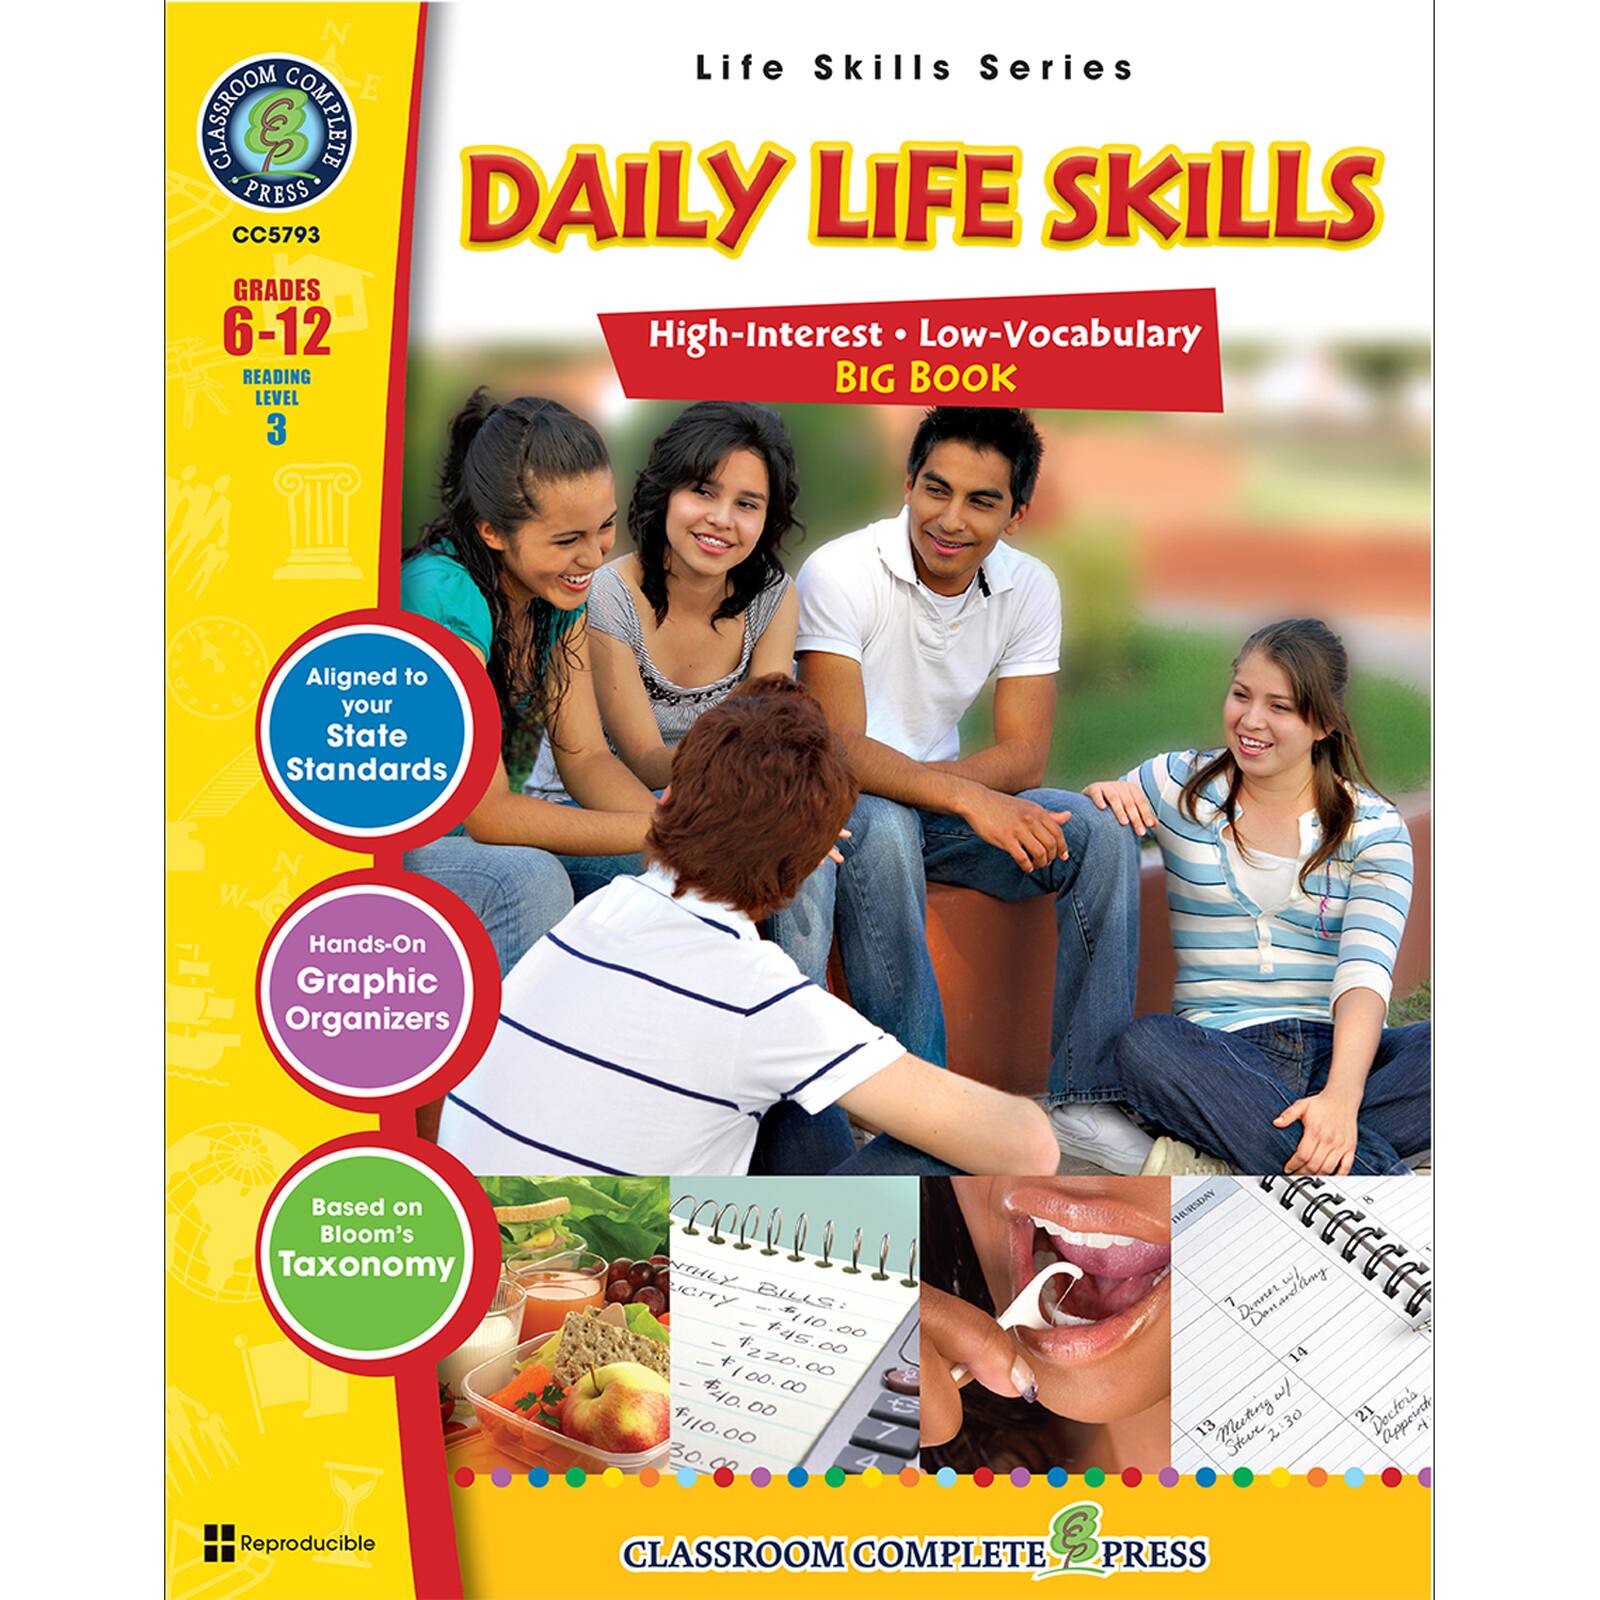 Find the Classroom Complete Press Daily Life Skills Big Book, Level 3 at Michaels